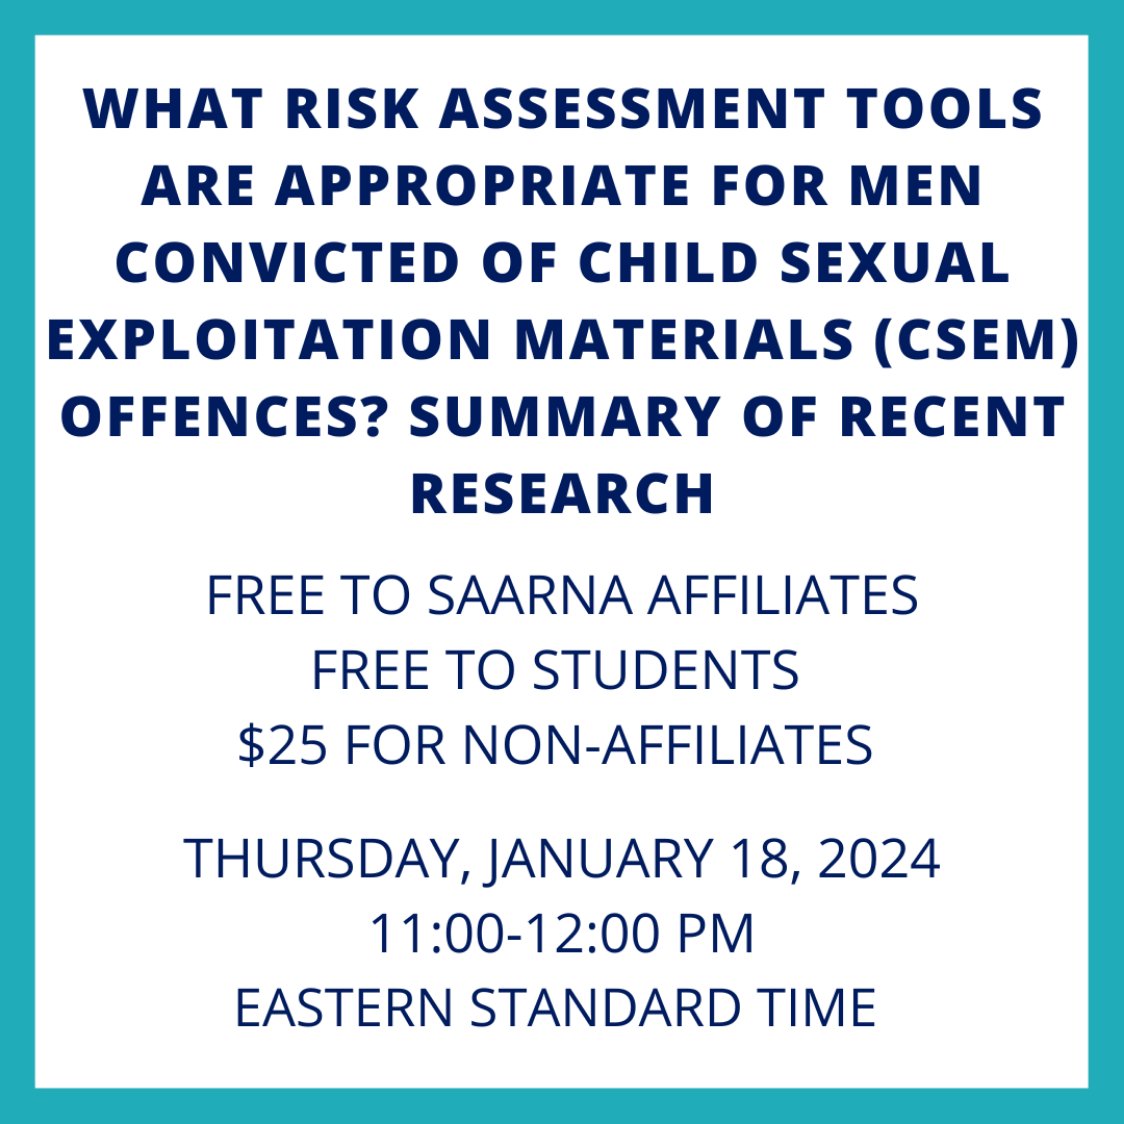 A new presentation is available early next year! This talk will review the latest research on risk assessment scales (specifically, the CPORT, Risk Matrix 2000, STABLE/ACUTE-2007, and Static-99R) with men convicted of CSEM offences.

Sign up here > saarna.org/product/what-r…